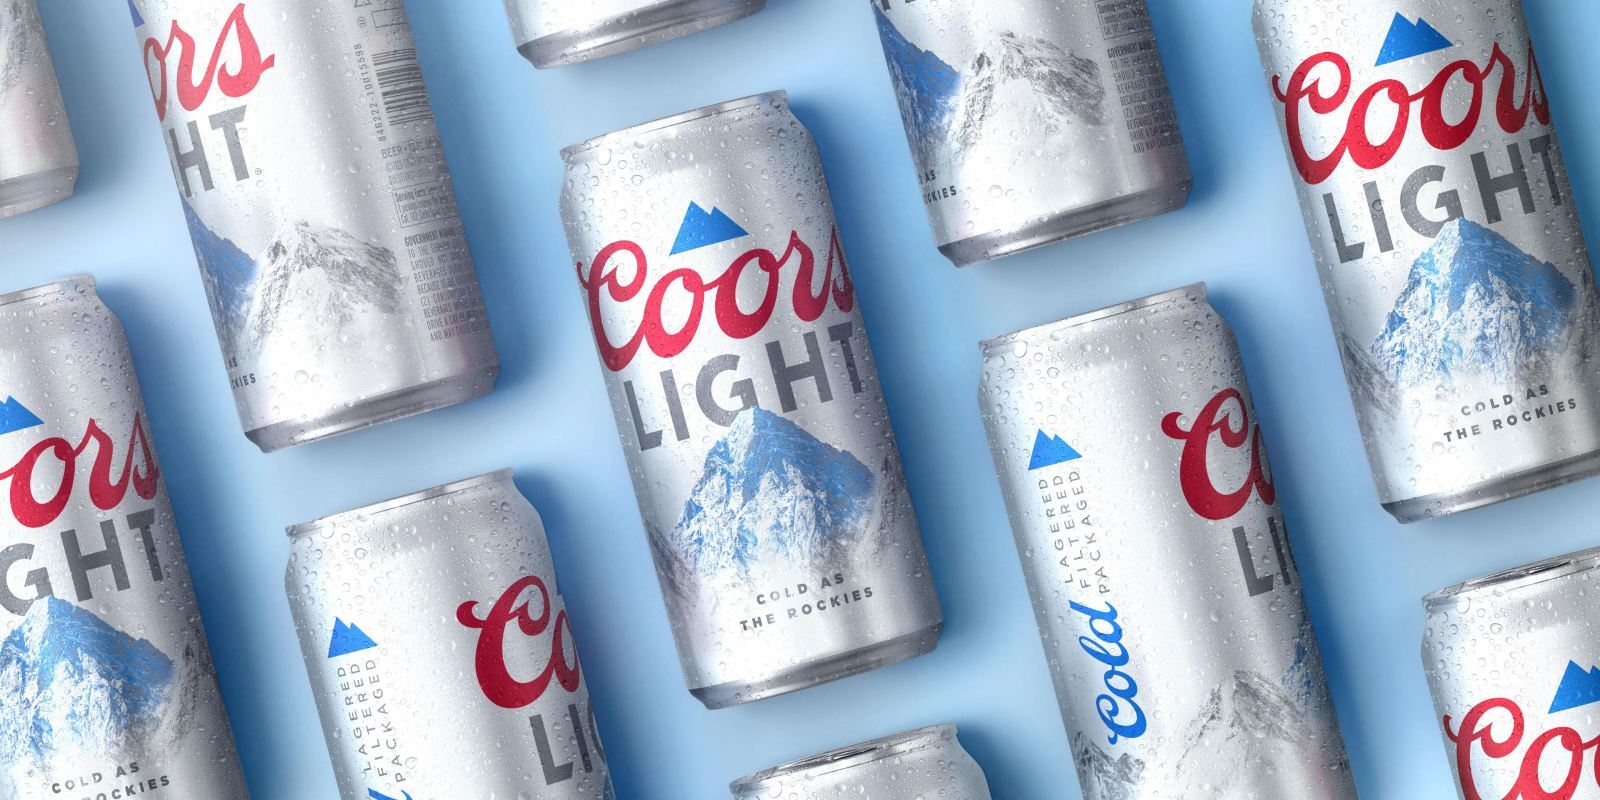 molson-coors-brewing-operations-disrupted-by-cyberattack-the-hack-posts